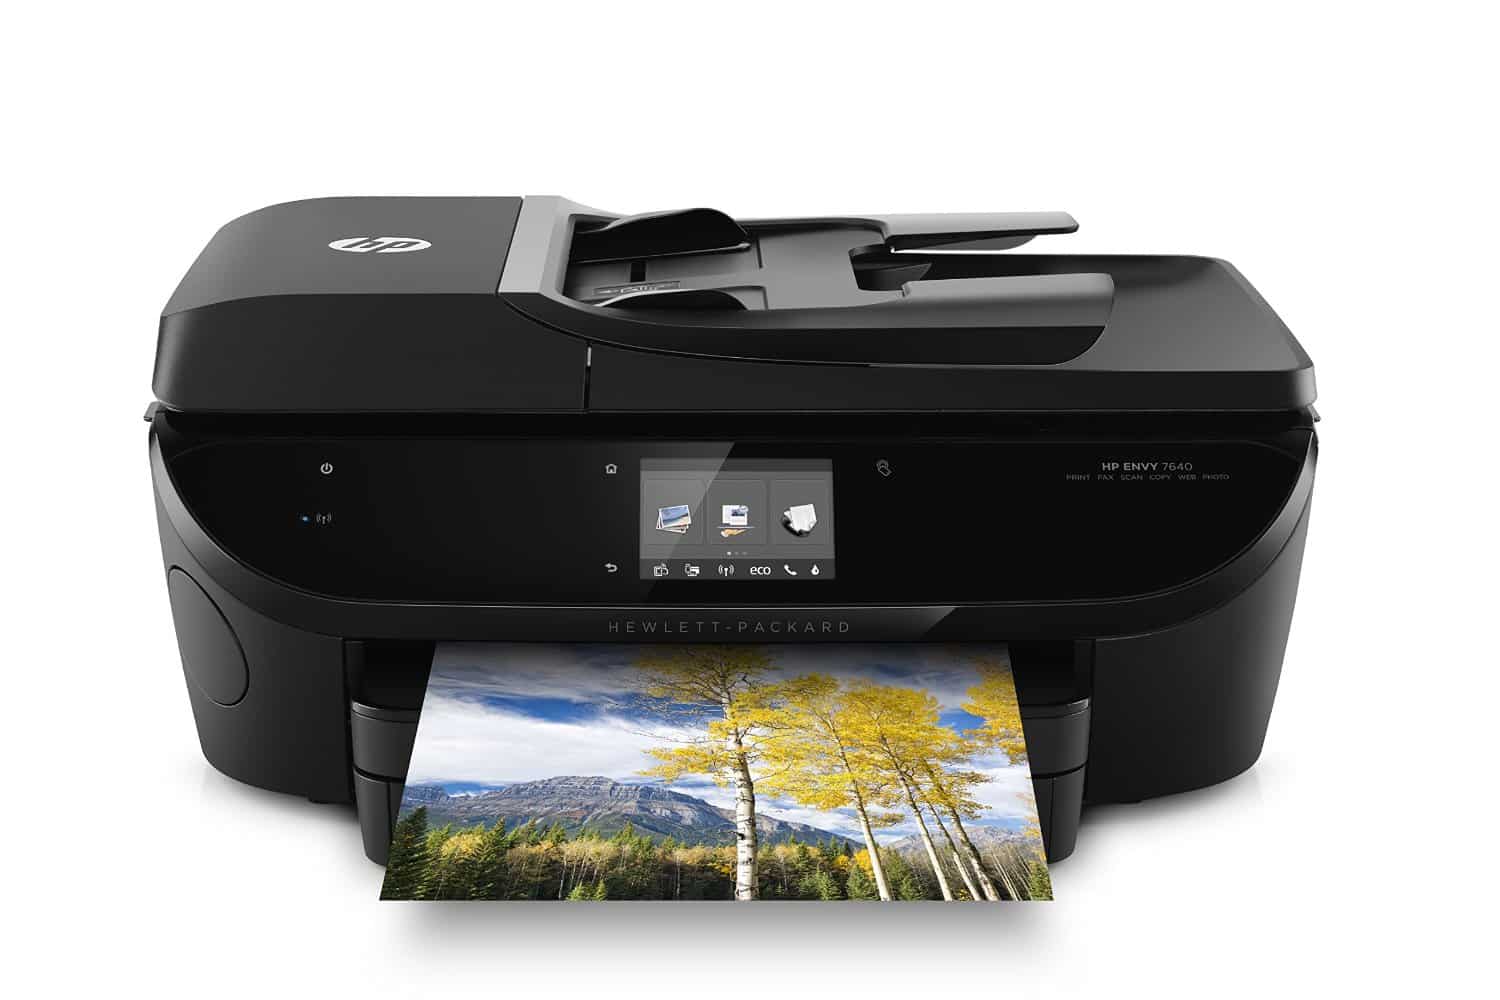 5. HP Envy 7640 Wireless All In One Photo Printer With Mobile Printing 